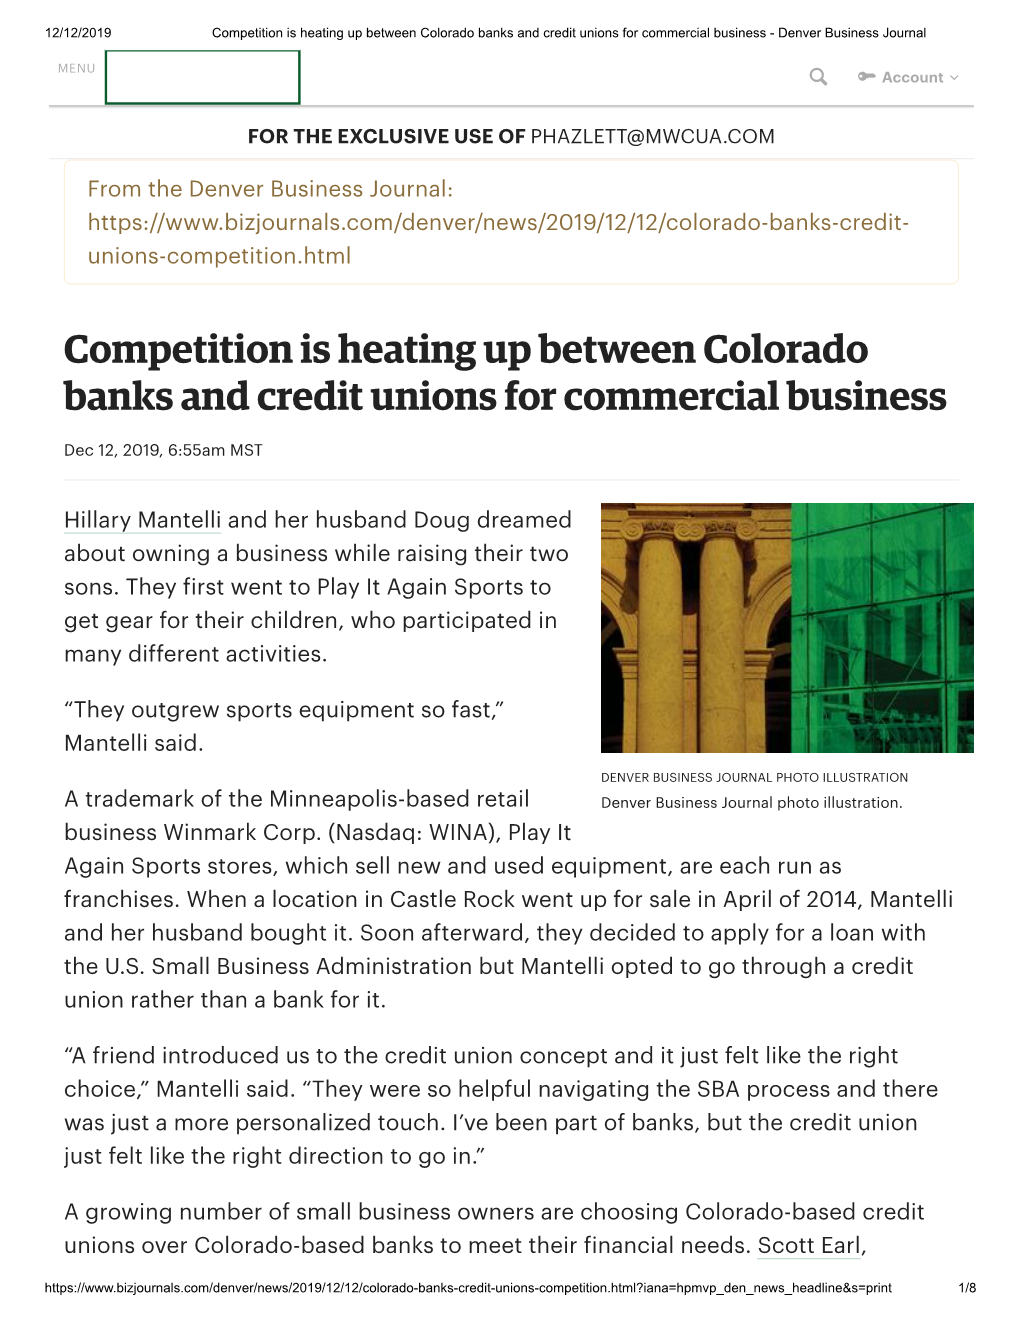 Competition Is Heating up Between Colorado Banks and Credit Unions for Commercial Business - Denver Business Journal